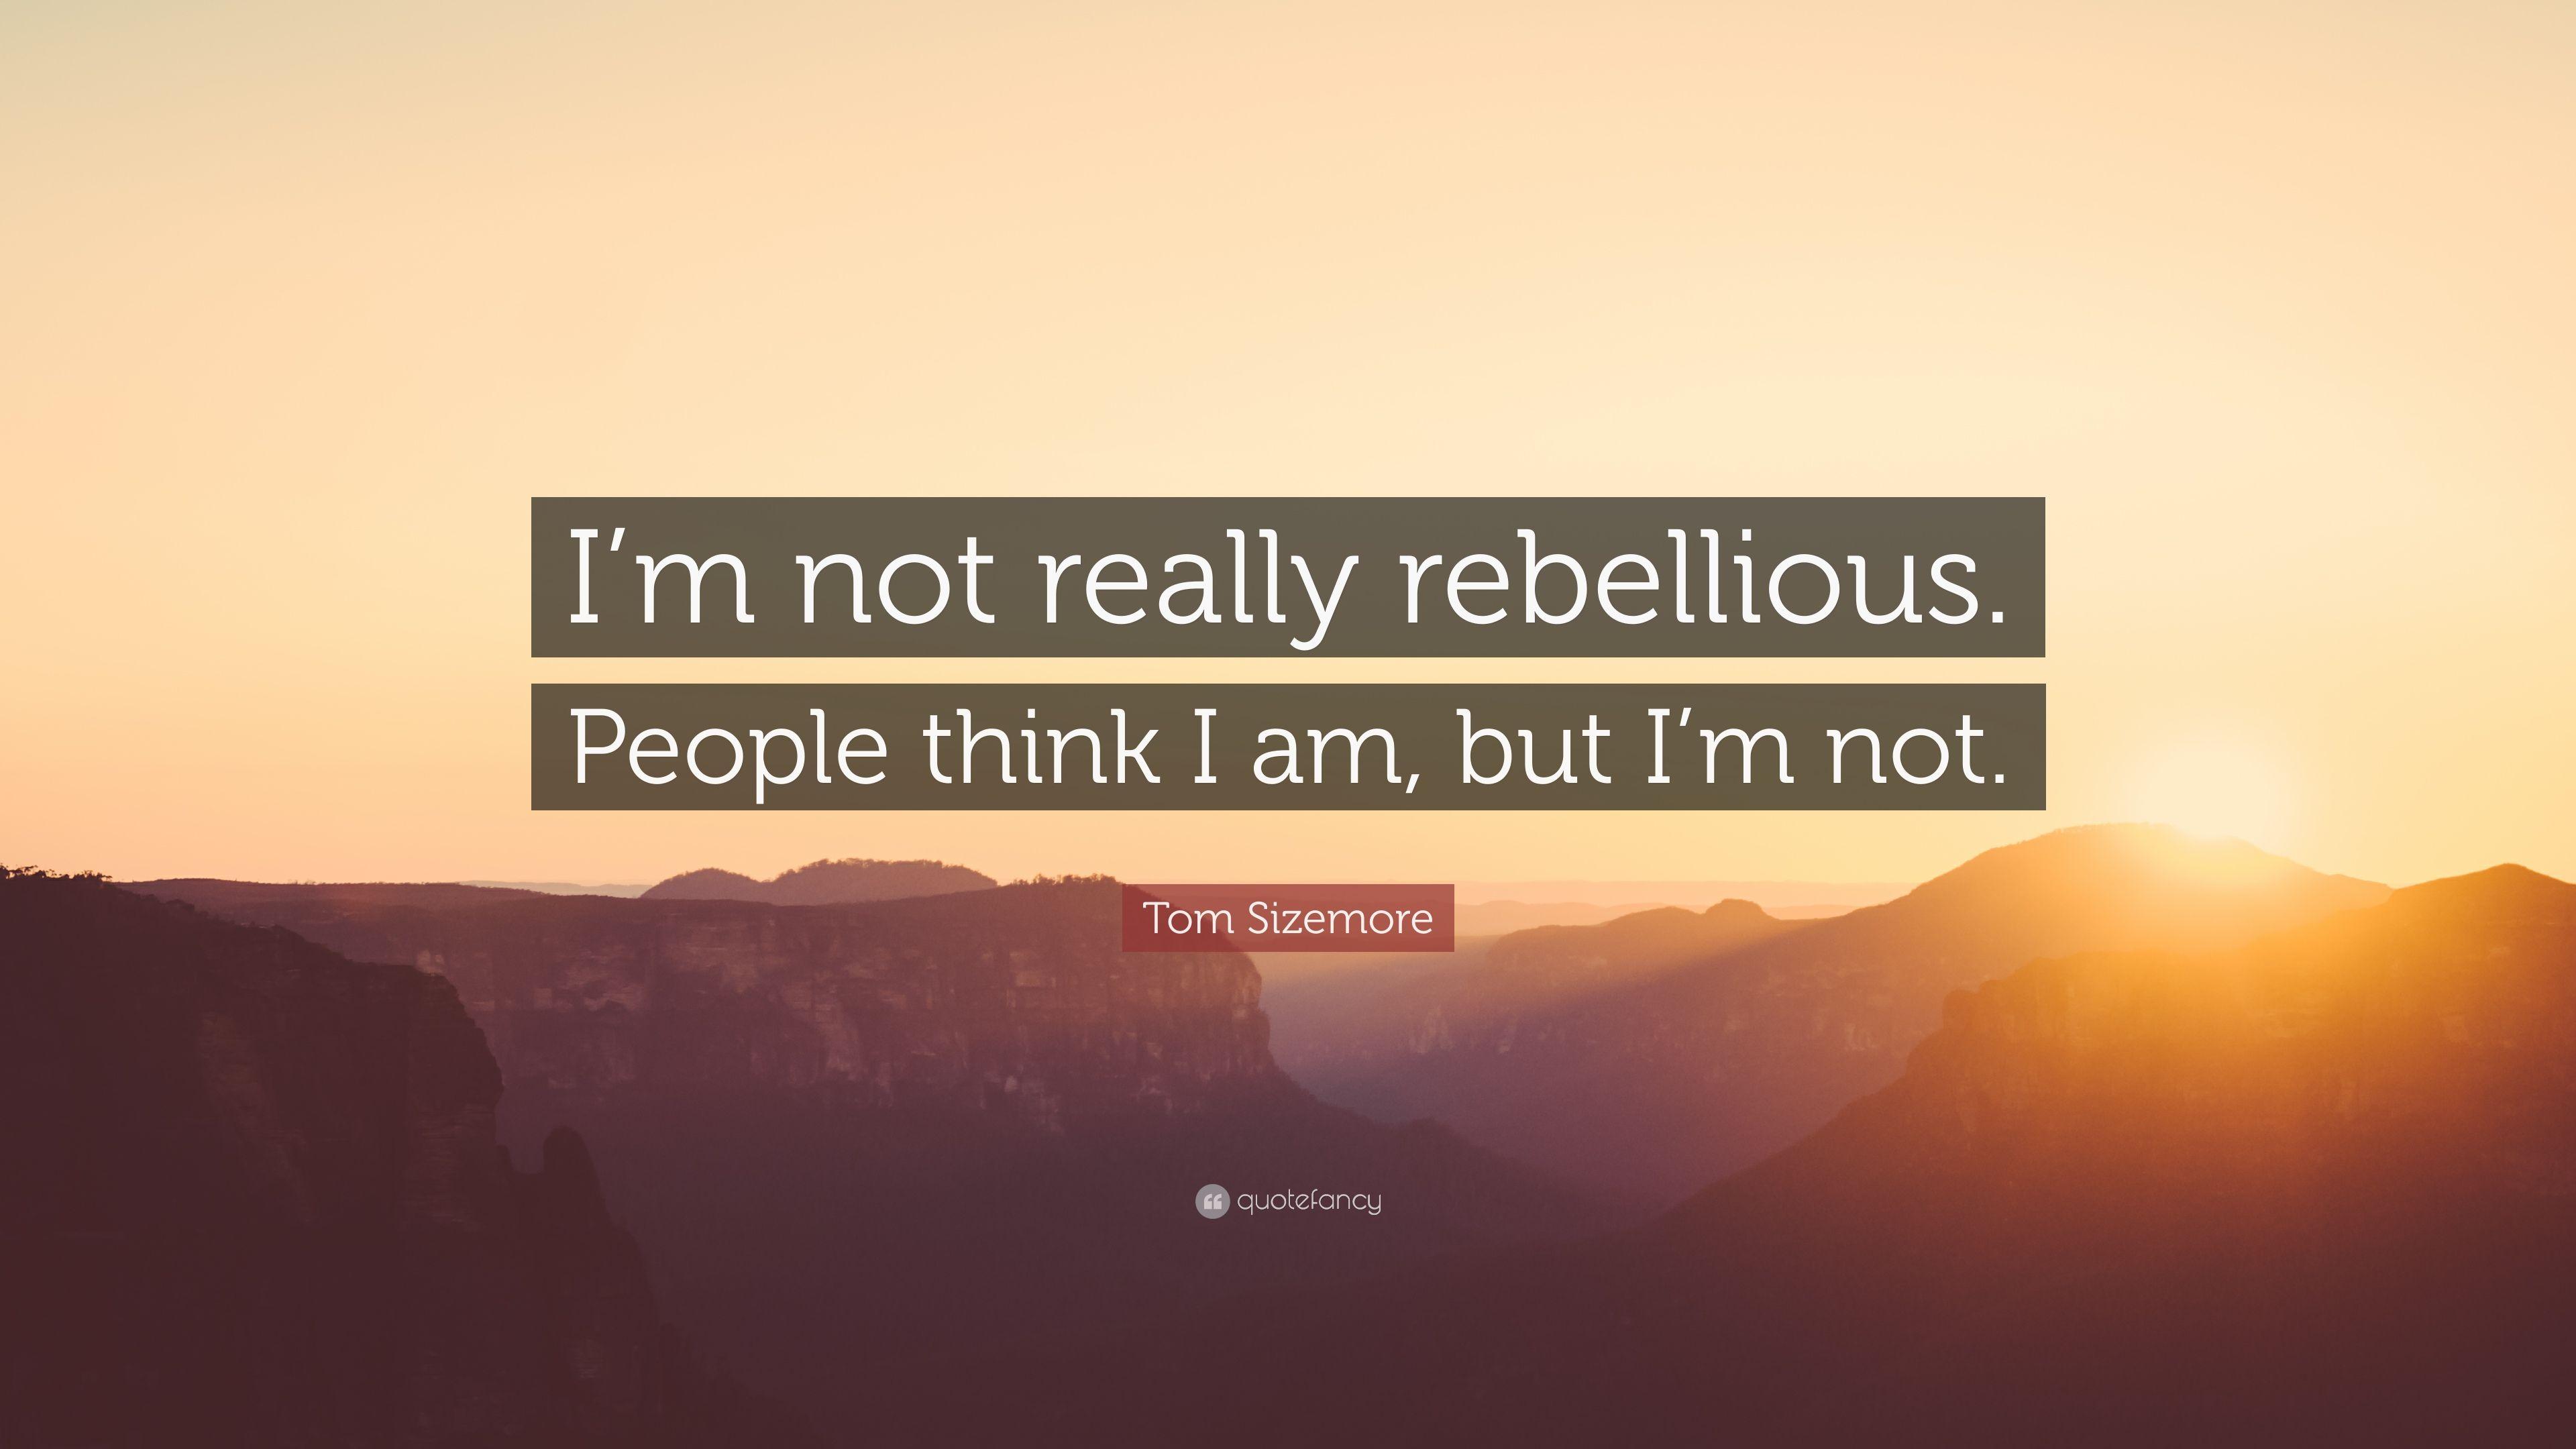 Tom Sizemore Quote: “I'm not really rebellious. People think I am